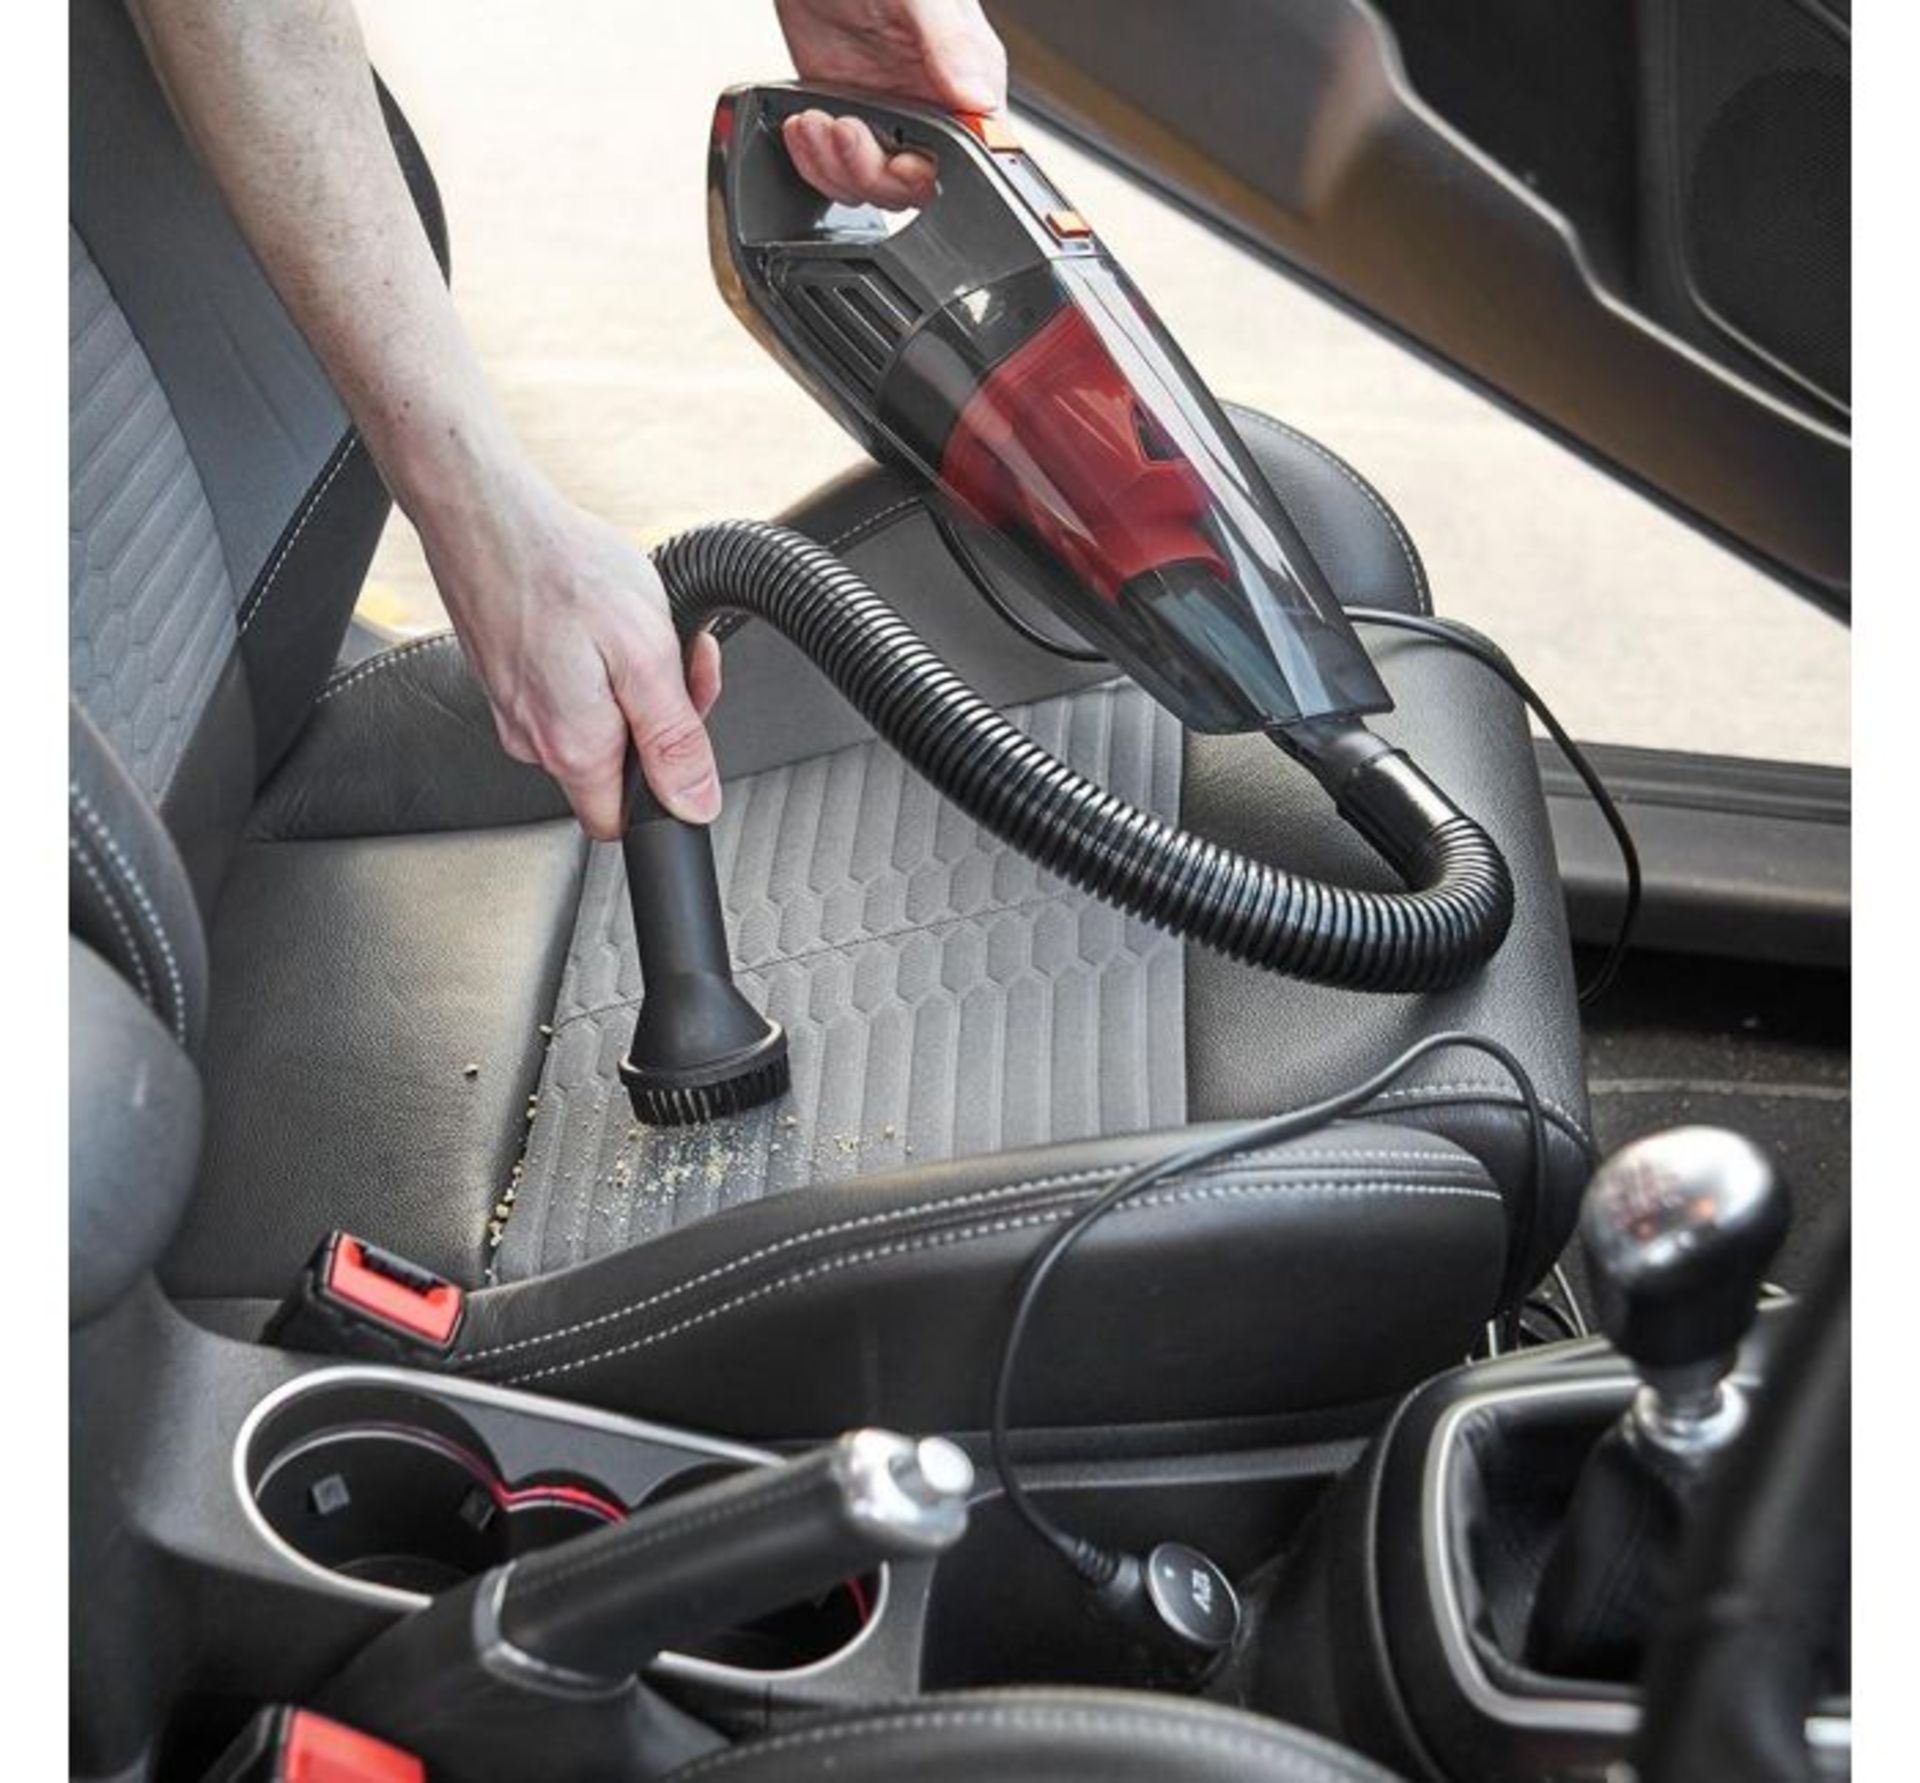 (X33) Car Vacuum 12V Wet & Dry. Compact and lightweight wet & dry handheld car vac with powerfu...